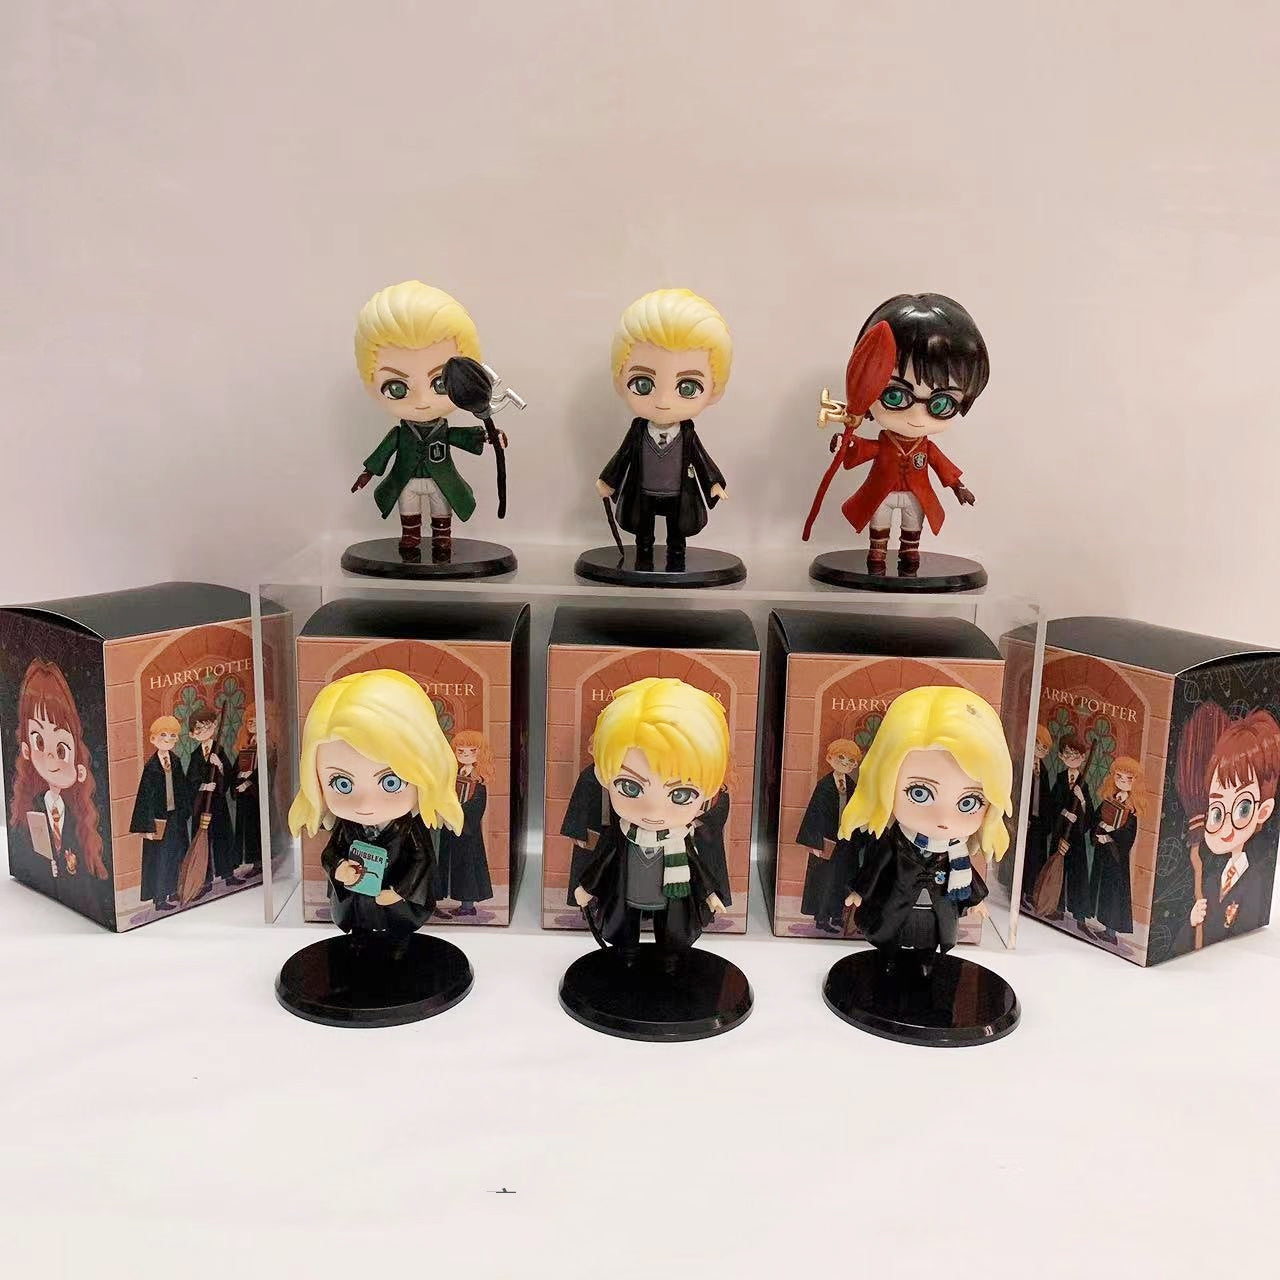 Cute Harry potter anime model as a good gift